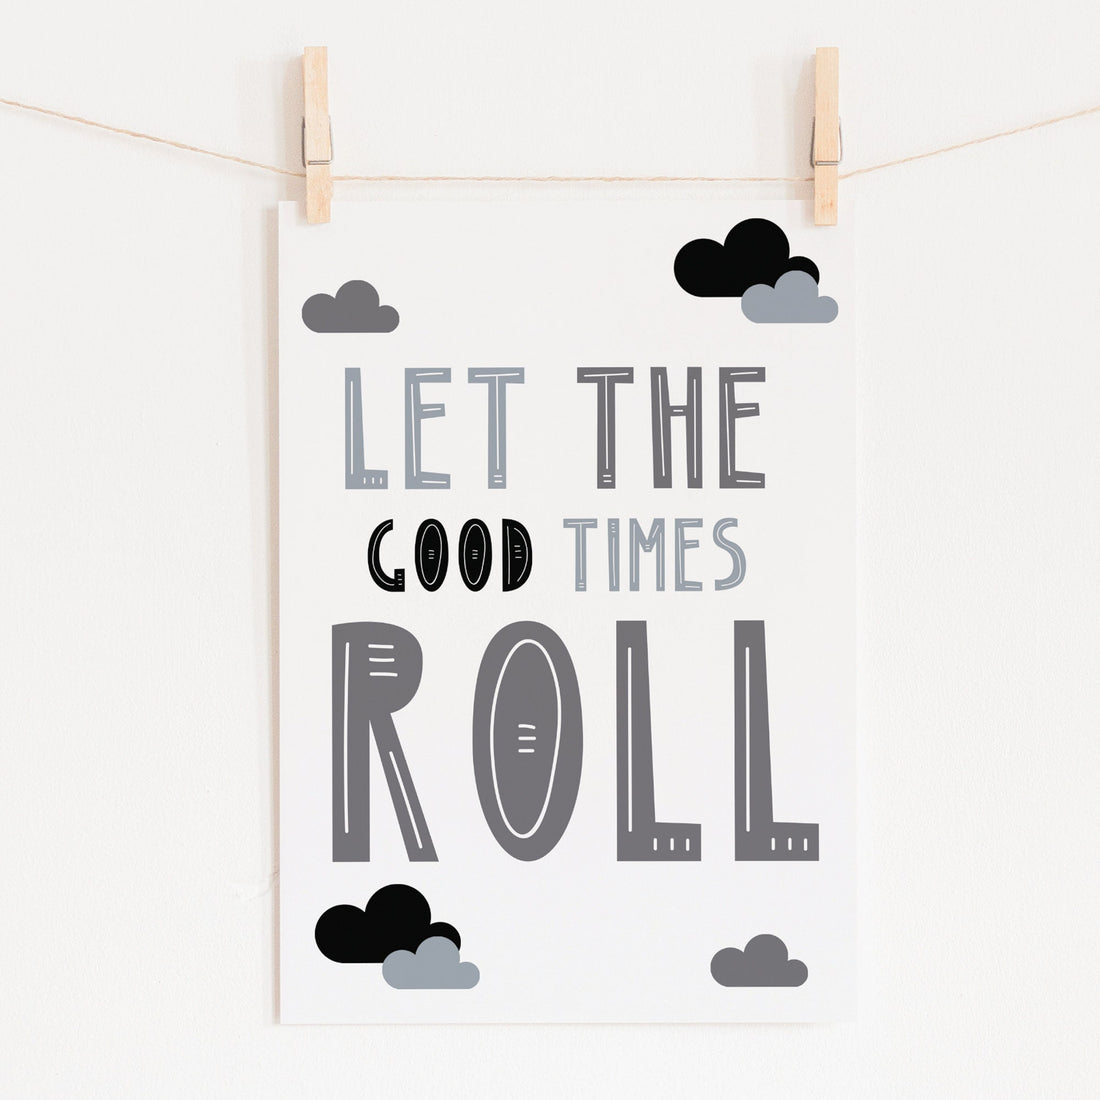 LEt The good times roll print